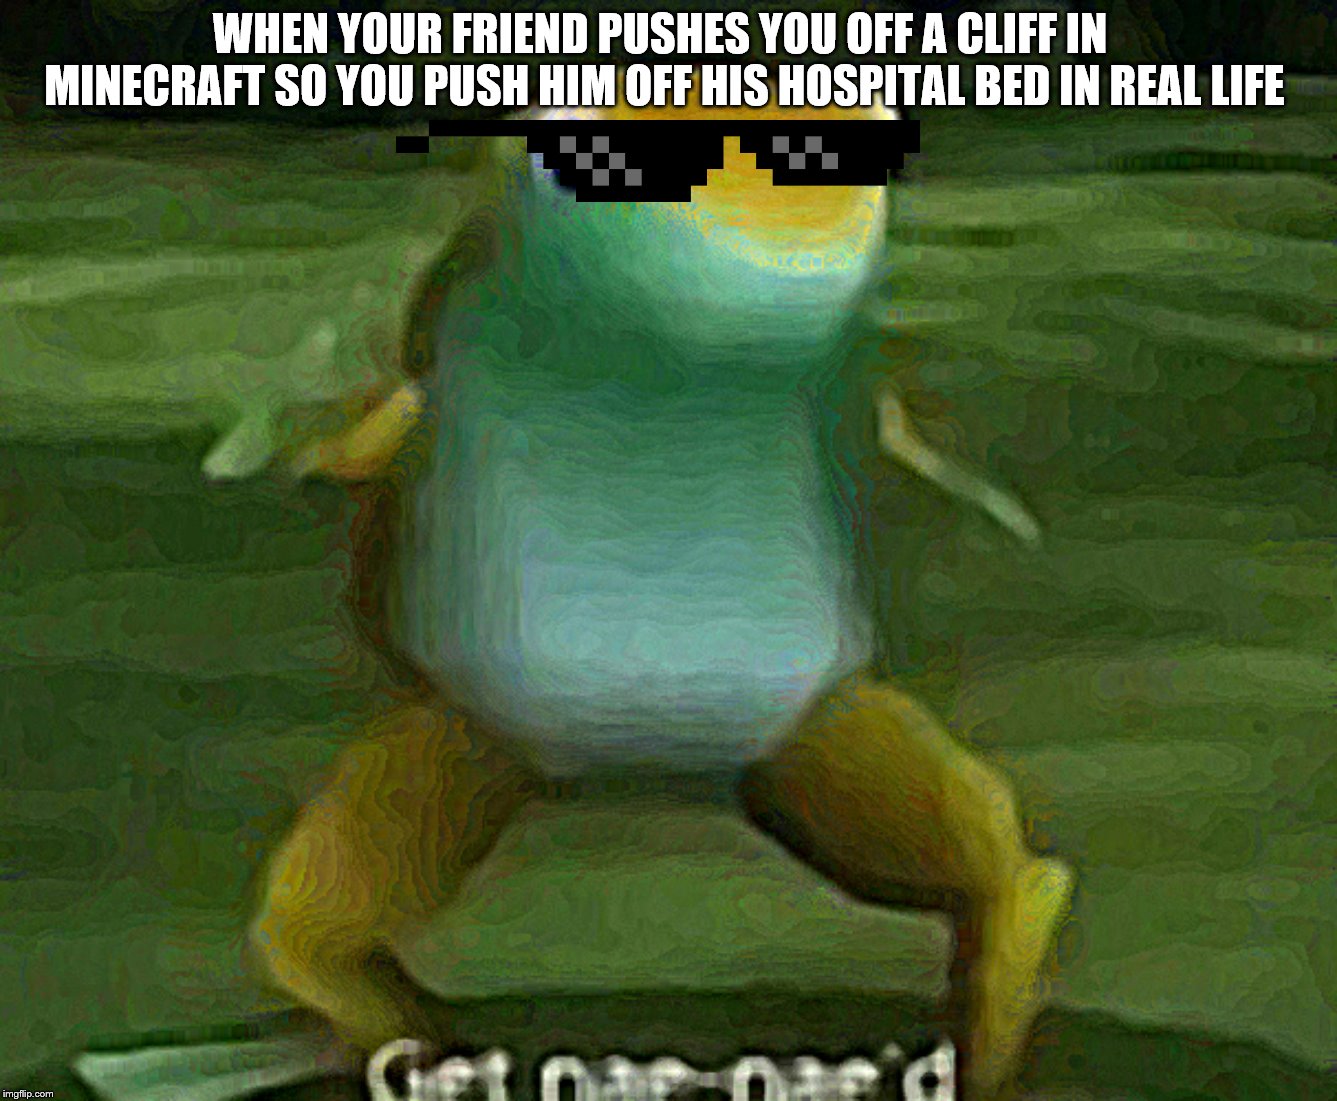 Get nae-nae'd | WHEN YOUR FRIEND PUSHES YOU OFF A CLIFF IN MINECRAFT SO YOU PUSH HIM OFF HIS HOSPITAL BED IN REAL LIFE | image tagged in get nae-nae'd,death,frog,memes,minecraft,bye felicia | made w/ Imgflip meme maker